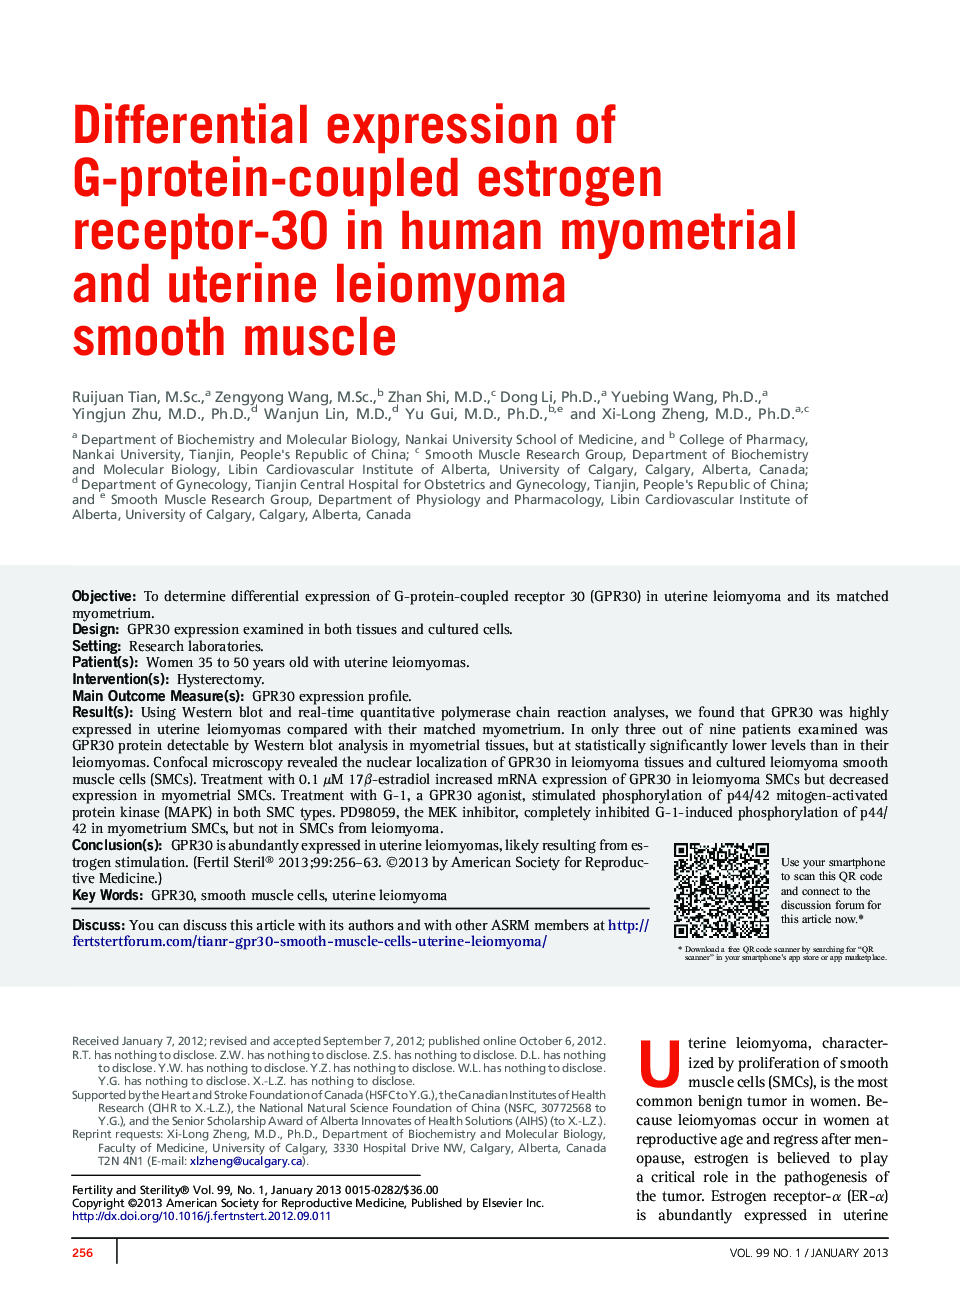 Differential expression of G-protein-coupled estrogen receptor-30 in human myometrial and uterine leiomyoma smooth muscle